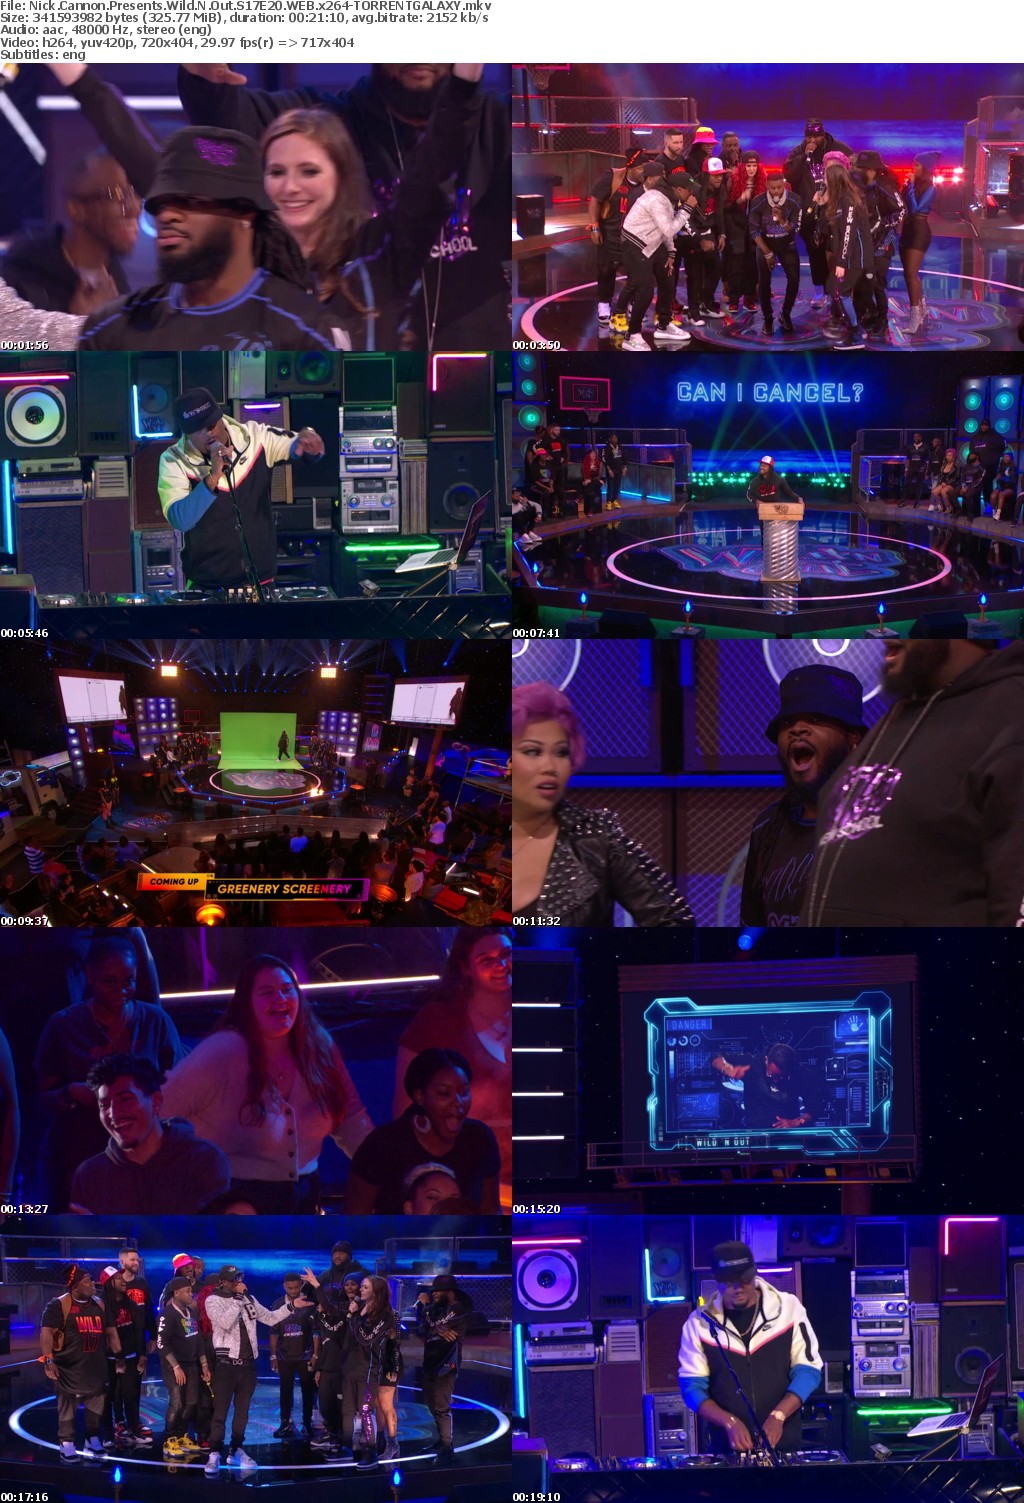 Nick Cannon Presents Wild N Out S17E20 WEB x264-GALAXY